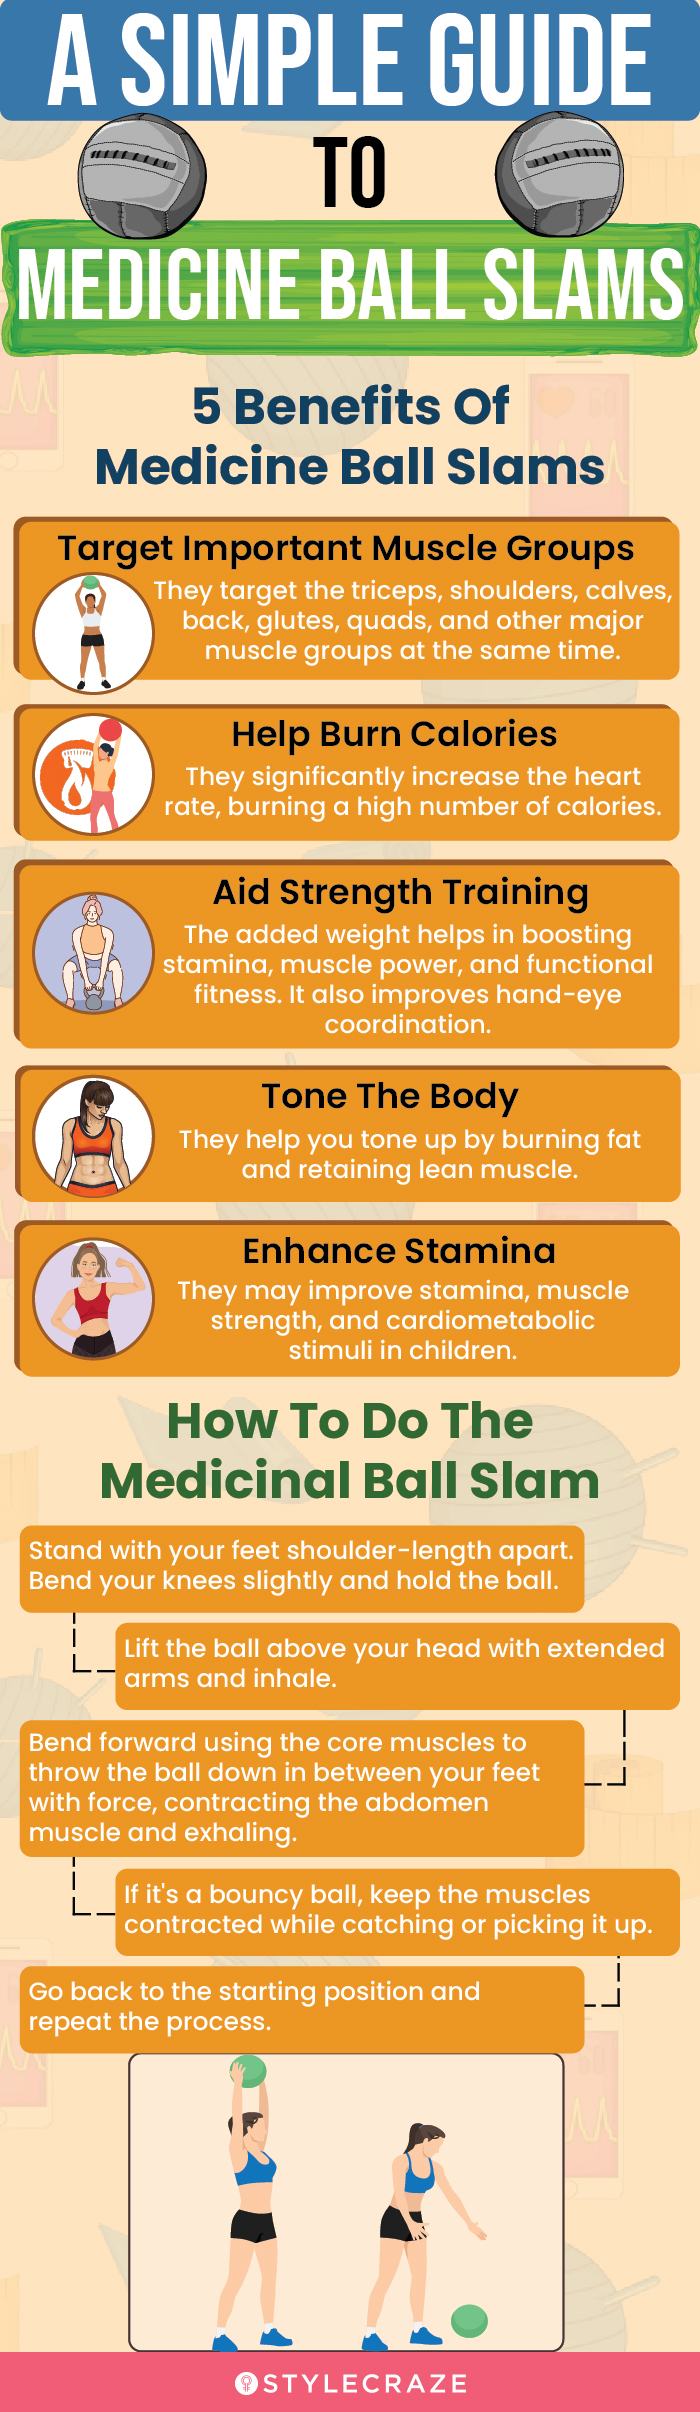 a simple guide to medicine ball slams (infographic)